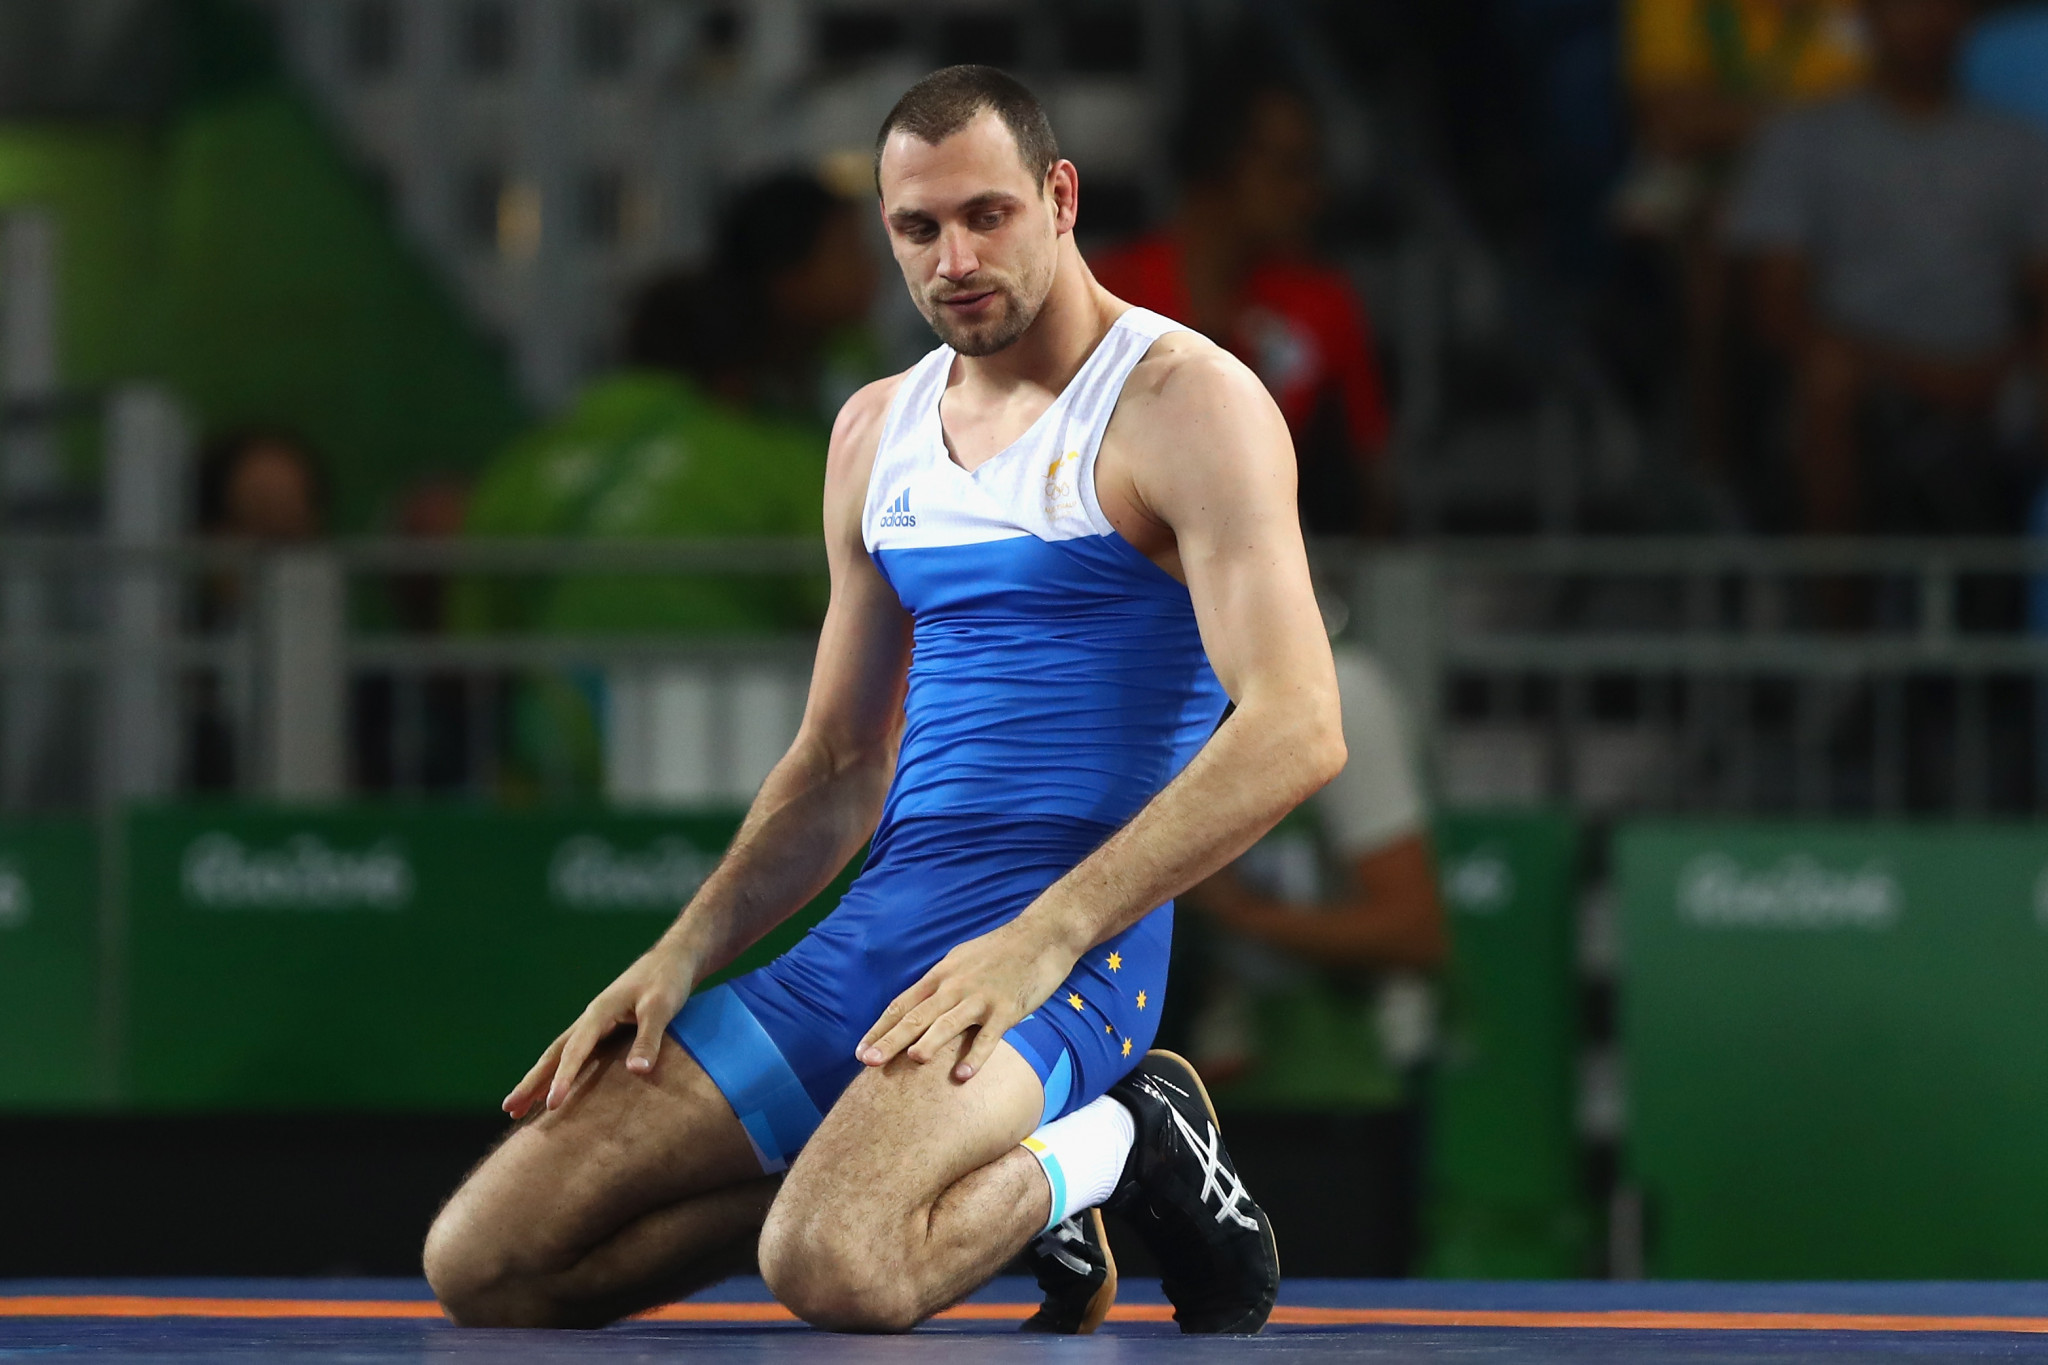 It has been 12 years since Australia medalled in wrestling at the Commonwealth Games, with Ivan Popov claiming one of Australia's medals by winning the men’s Greco Roman 120kg category in New Delhi ©Getty Images